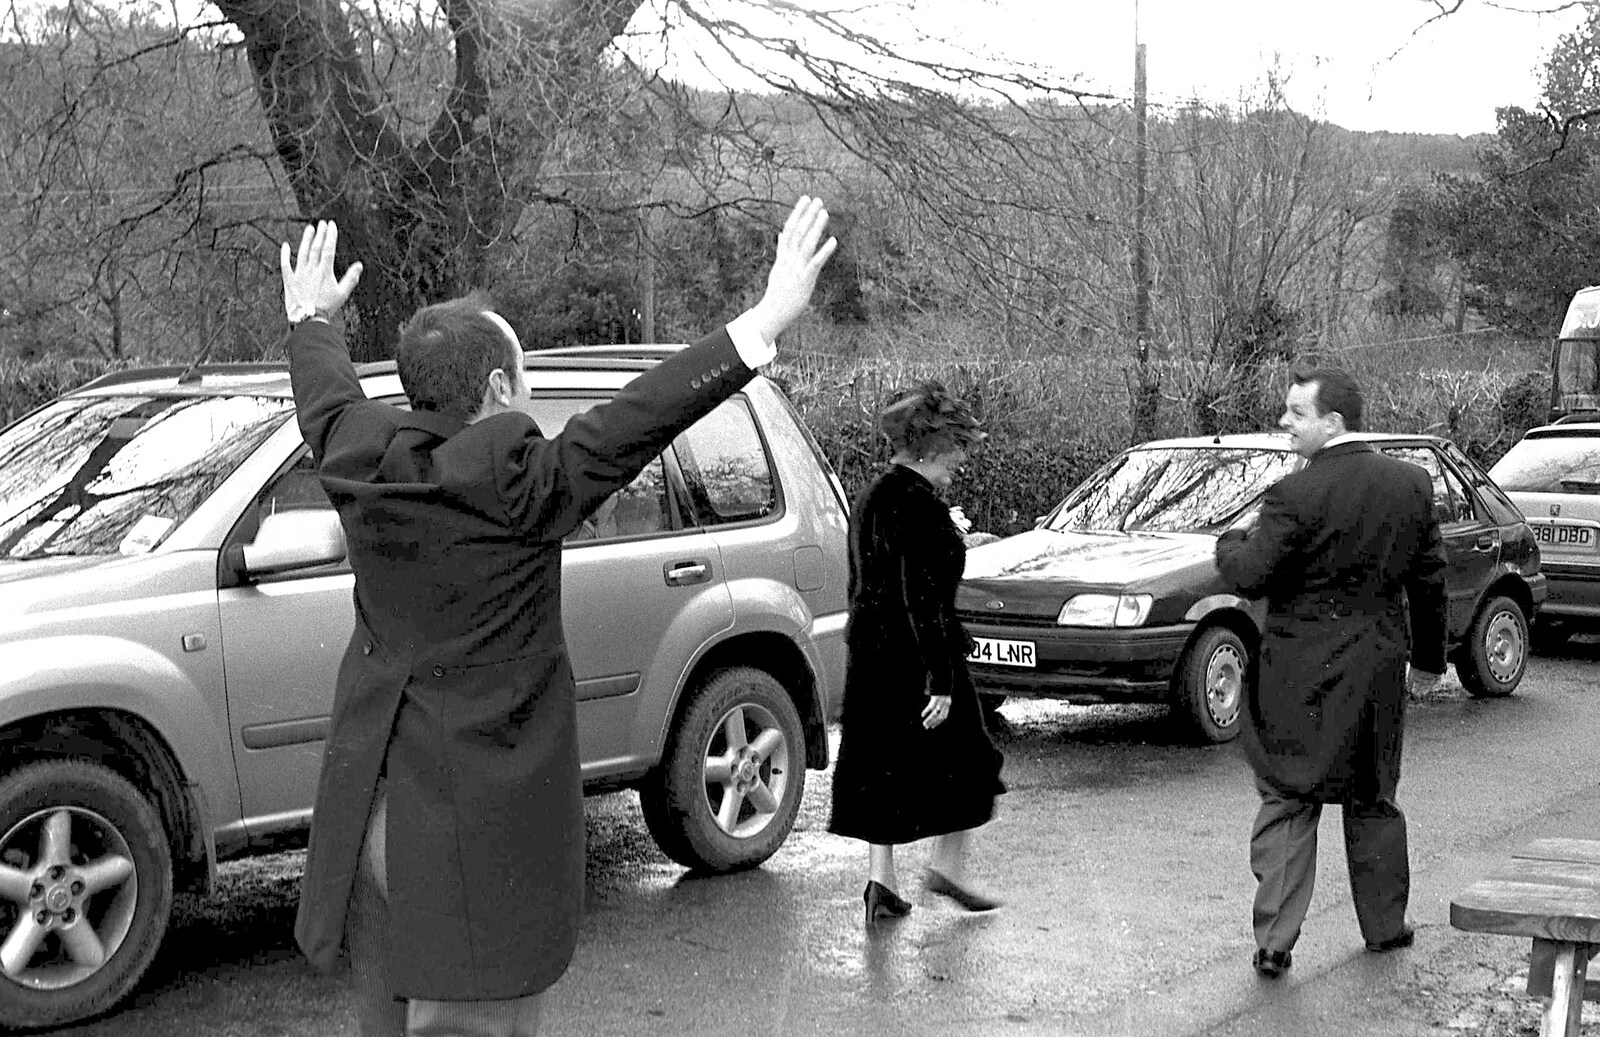 Matt waves his arms in the air from Sis's Nearly-Christmas Wedding, Meavy, Dartmoor - 20th December 2003